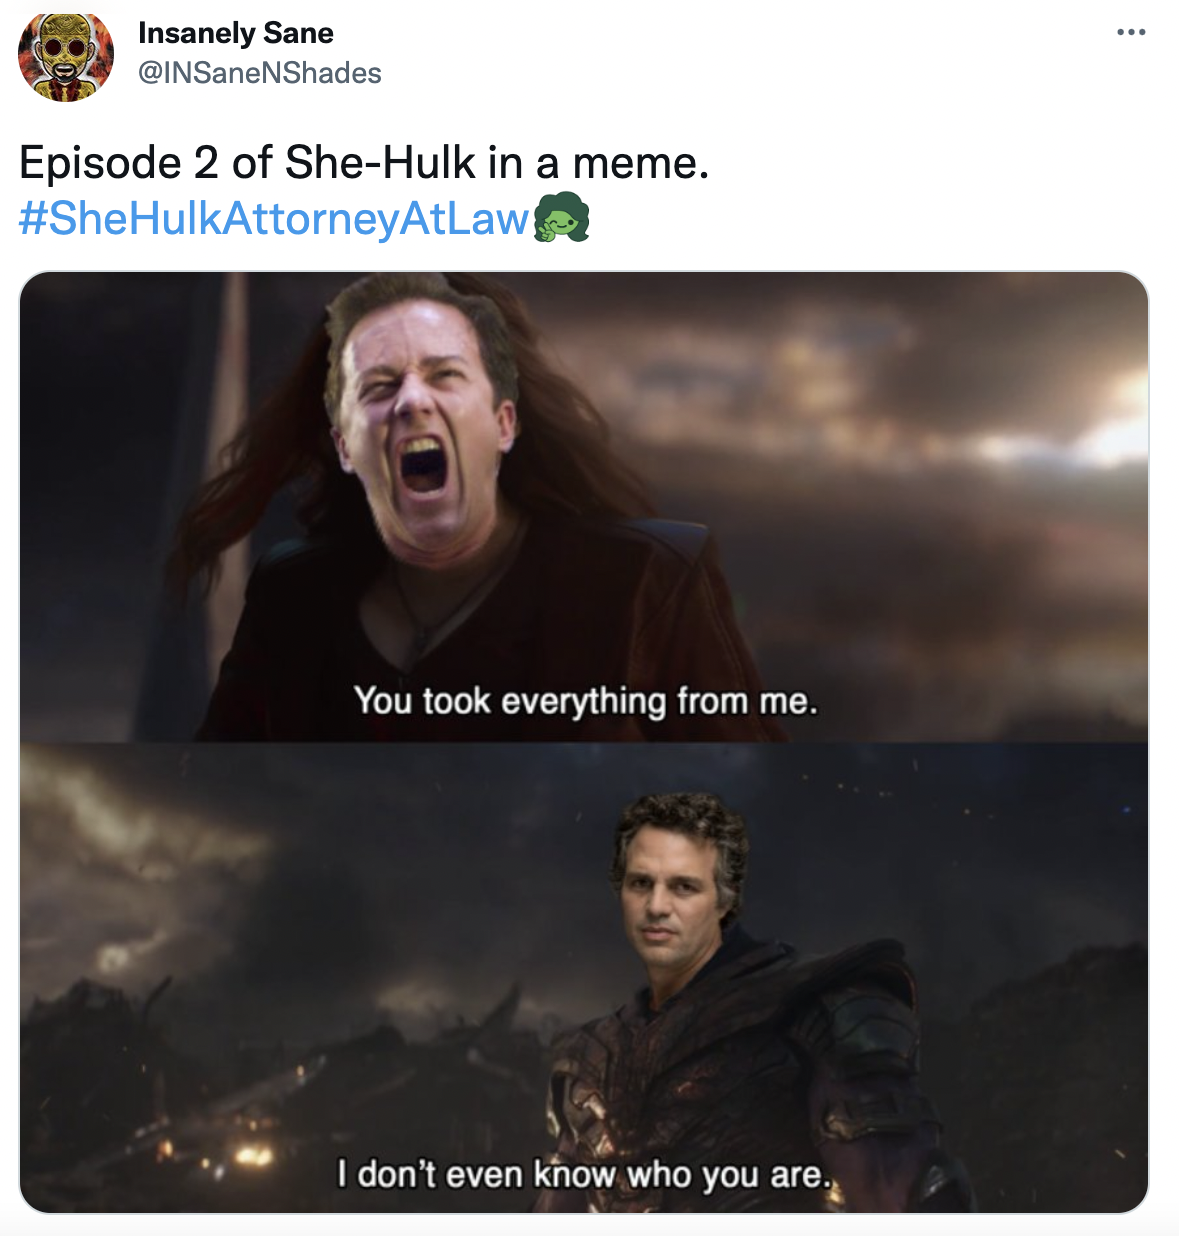 She-Hulk memes - you took everything from me - Insanely Sane Episode 2 of SheHulk in a meme. ! You took everything from me. I don't even know who you are.